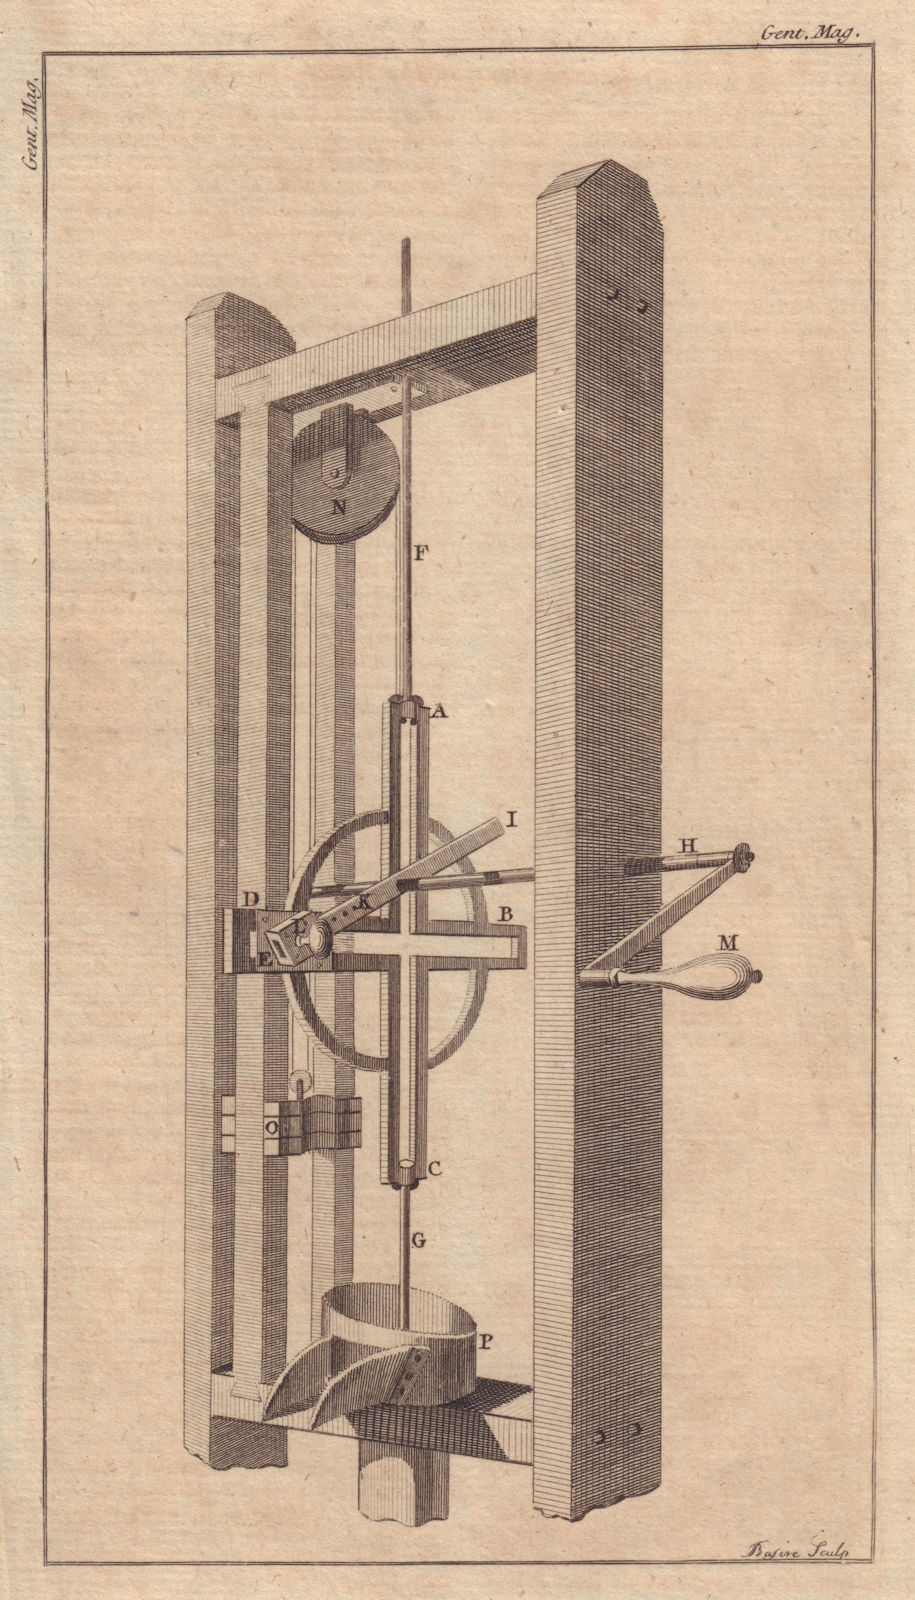 Associate Product An improved Water-pump. Engineering. GENTS MAG 1758 old antique print picture